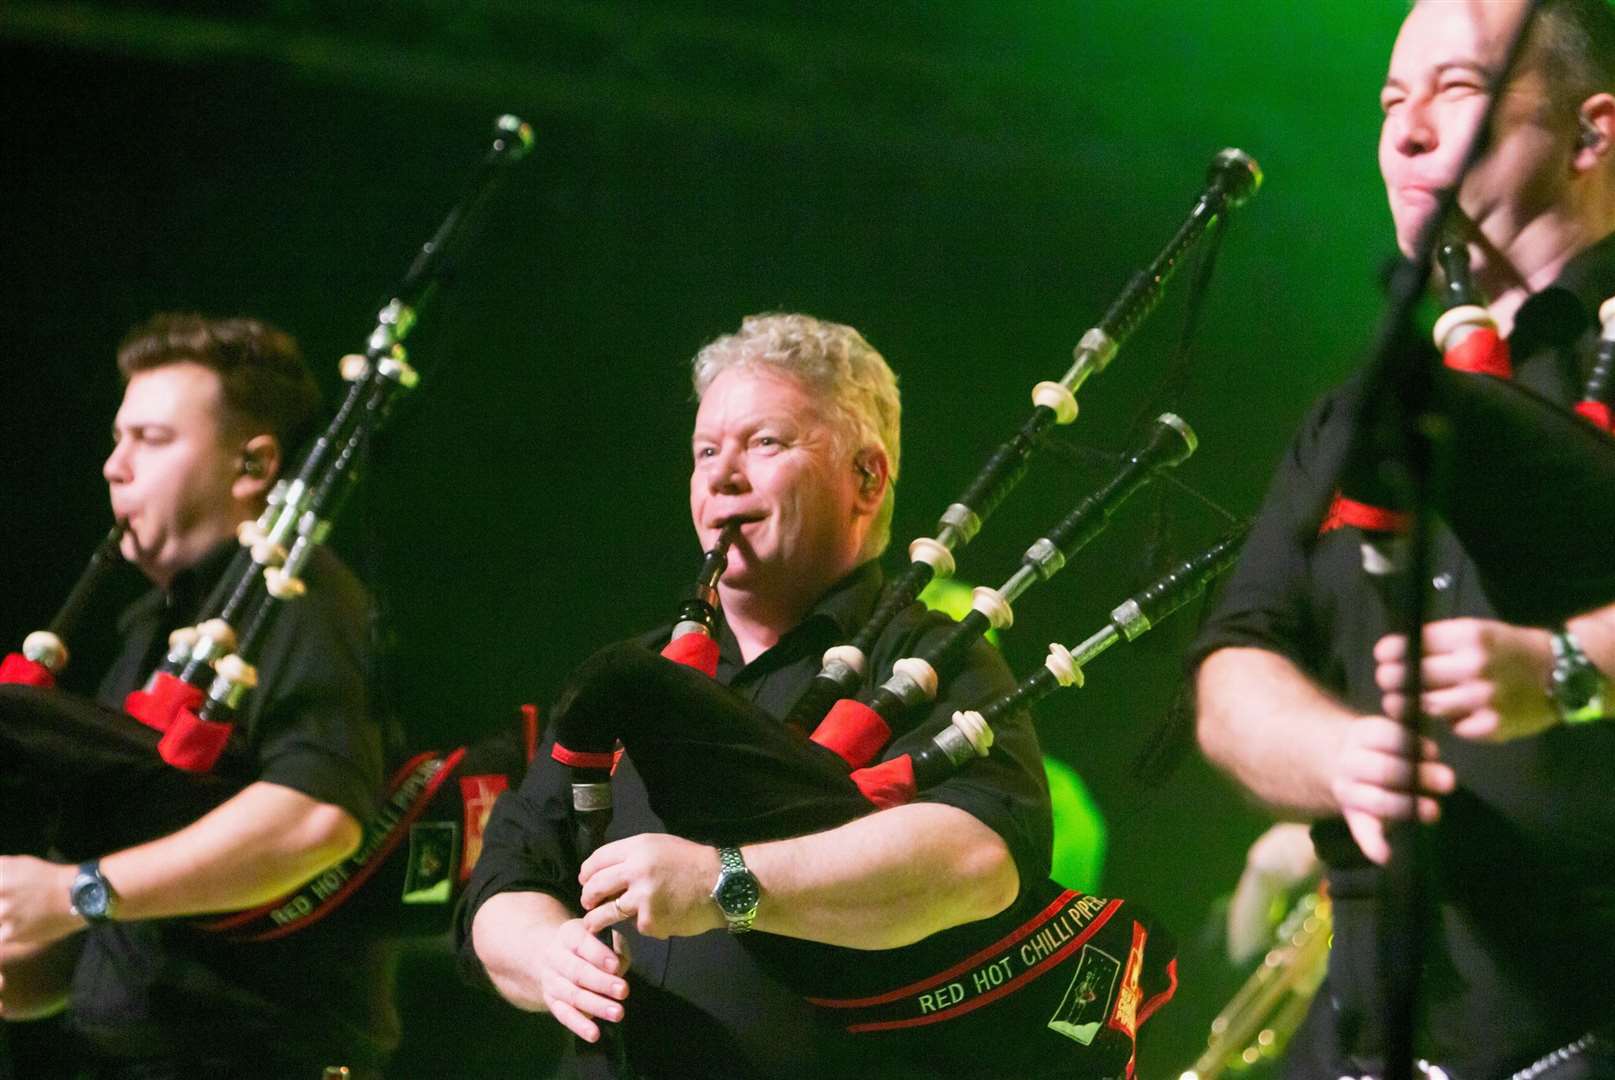 The Red Hot Chilli Pipers.